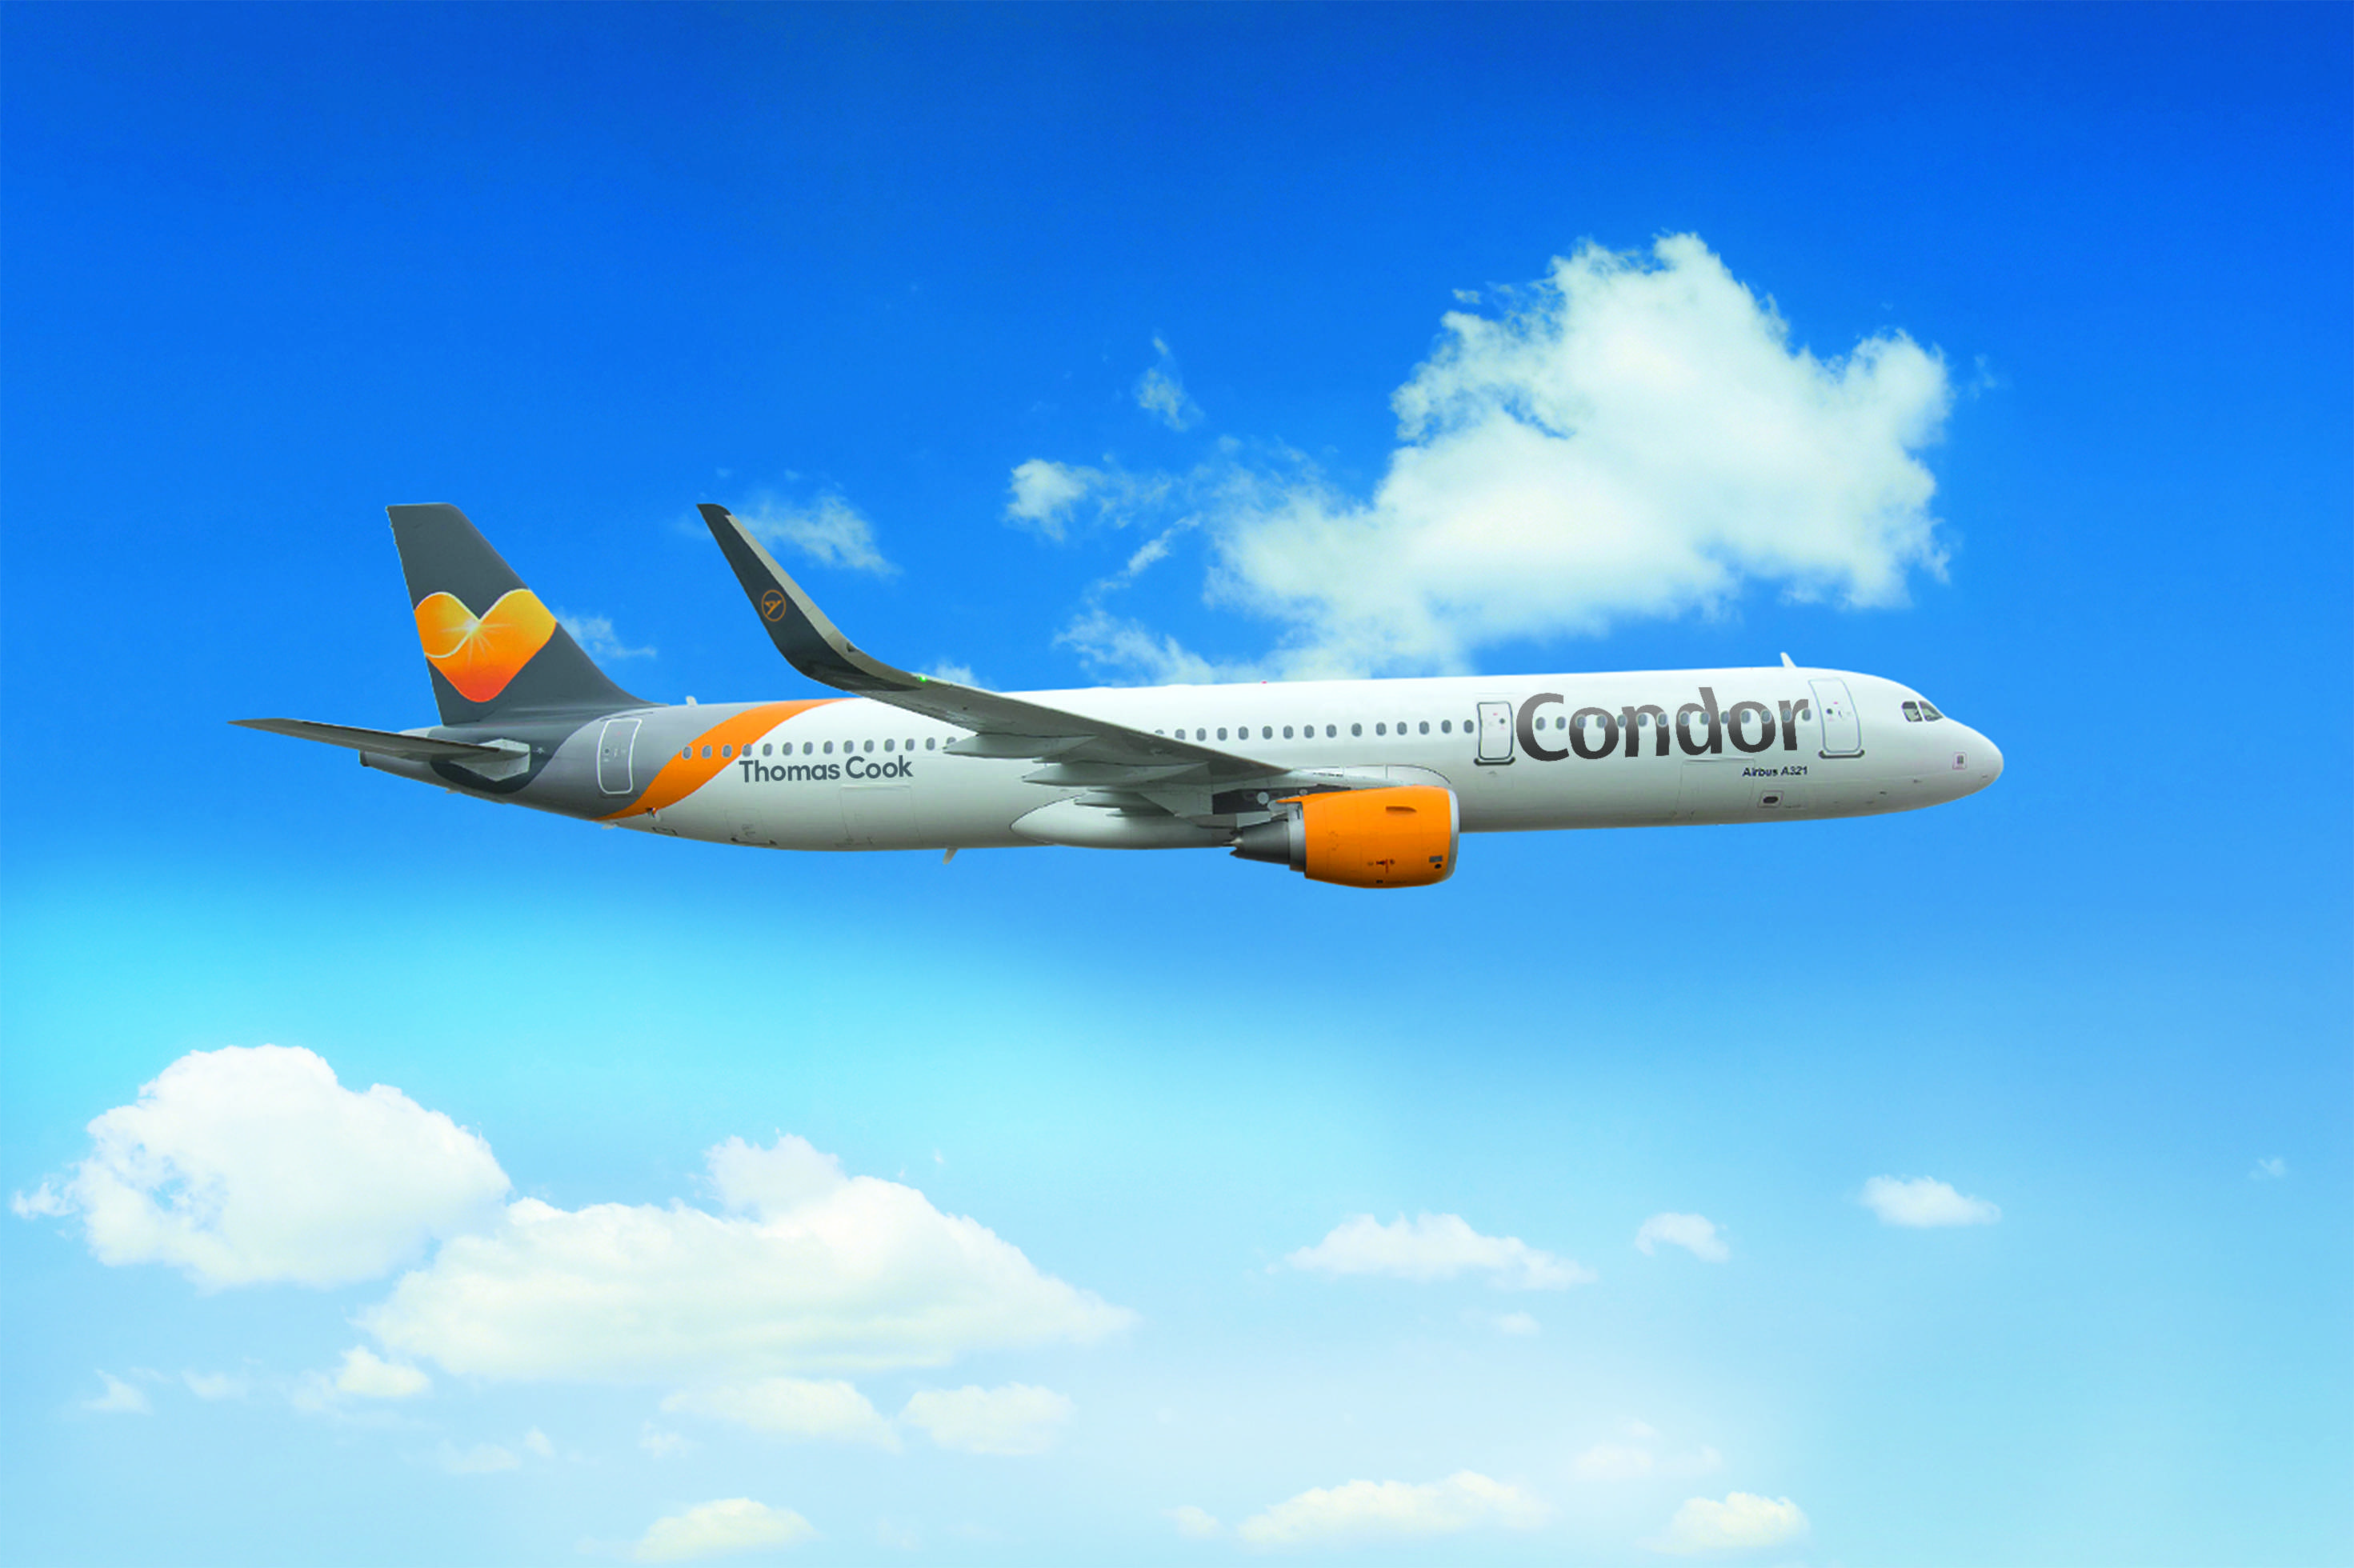 Condor | book our flights online & save | low-fares, offers & more